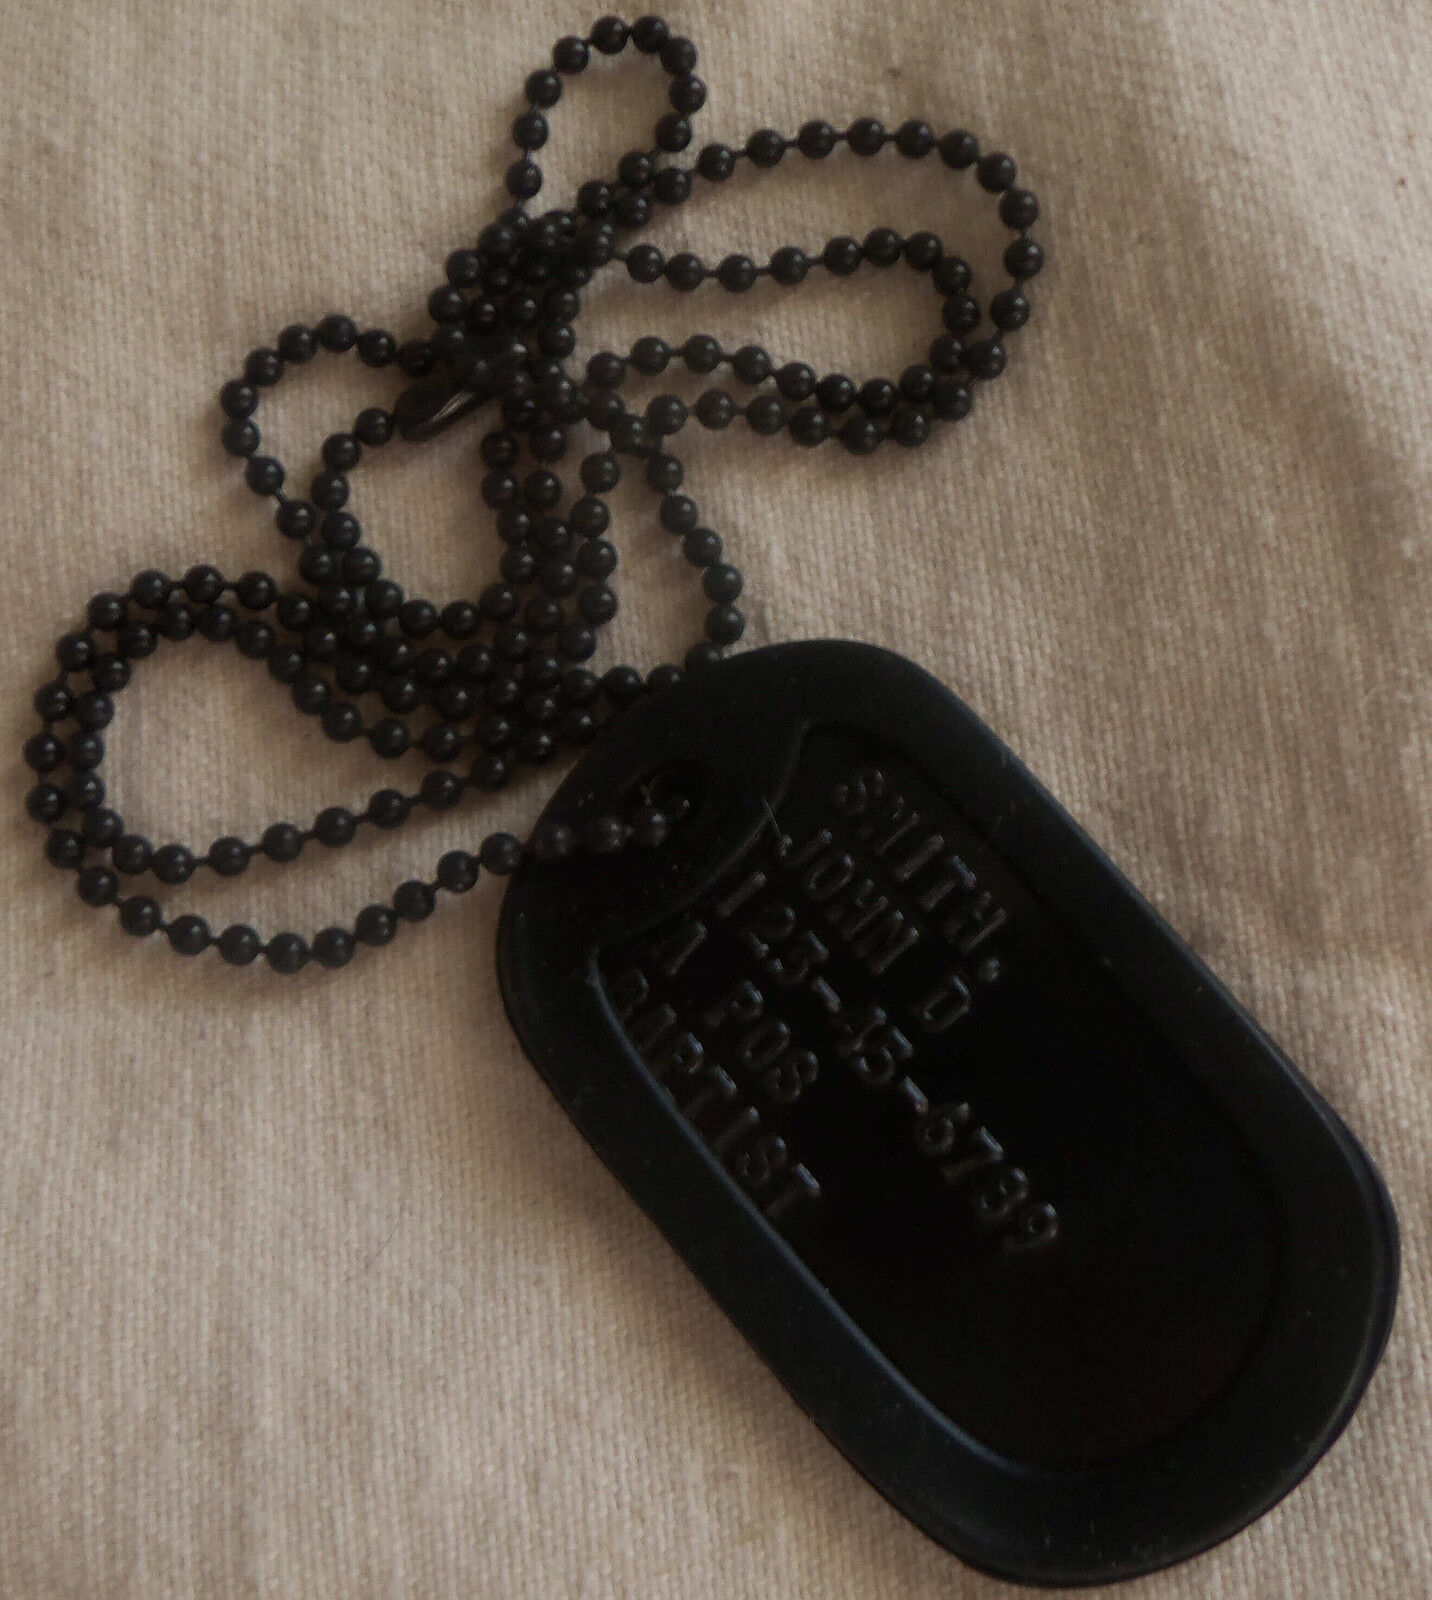 Real Standard Black Military Issue Gi Dog Tag Dogtag Made Just For U